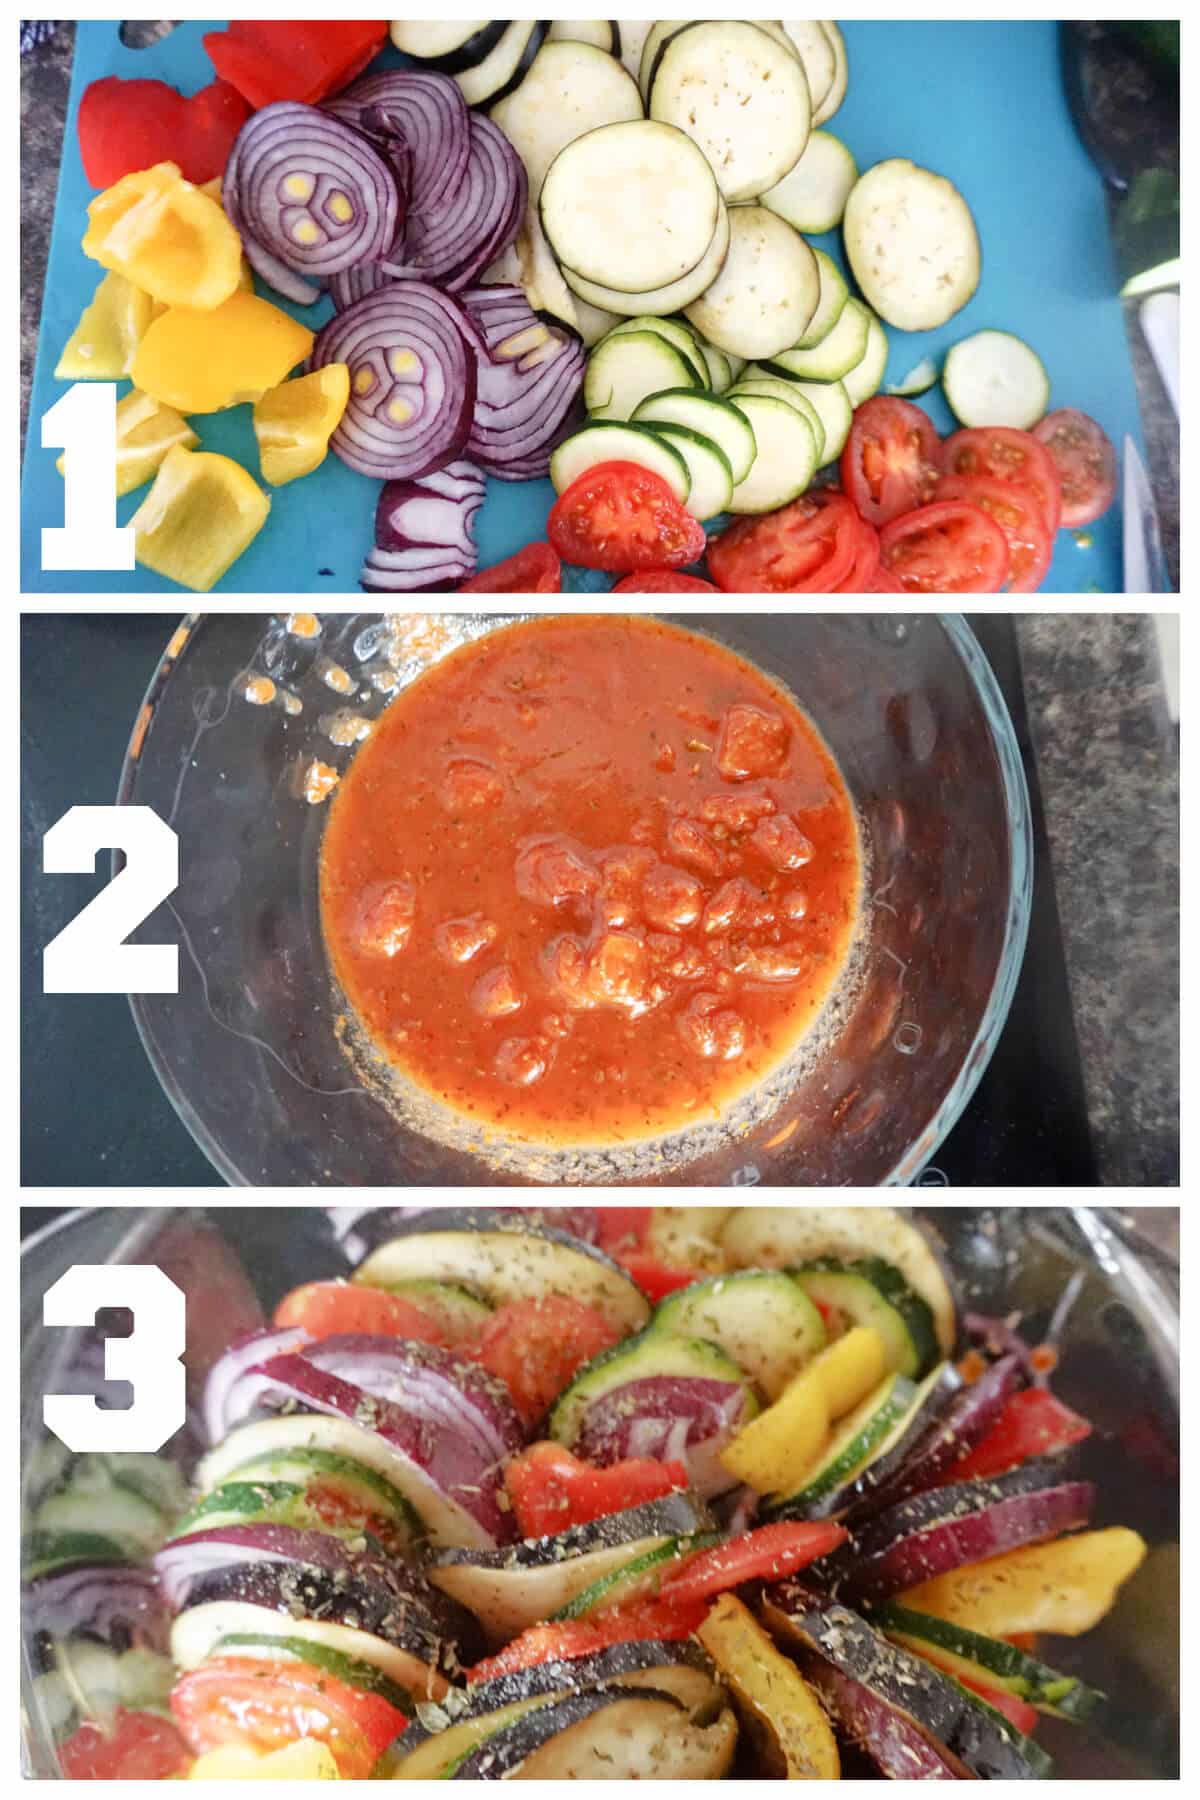 Collage of 3 photos to show how to make baked ratatouille.